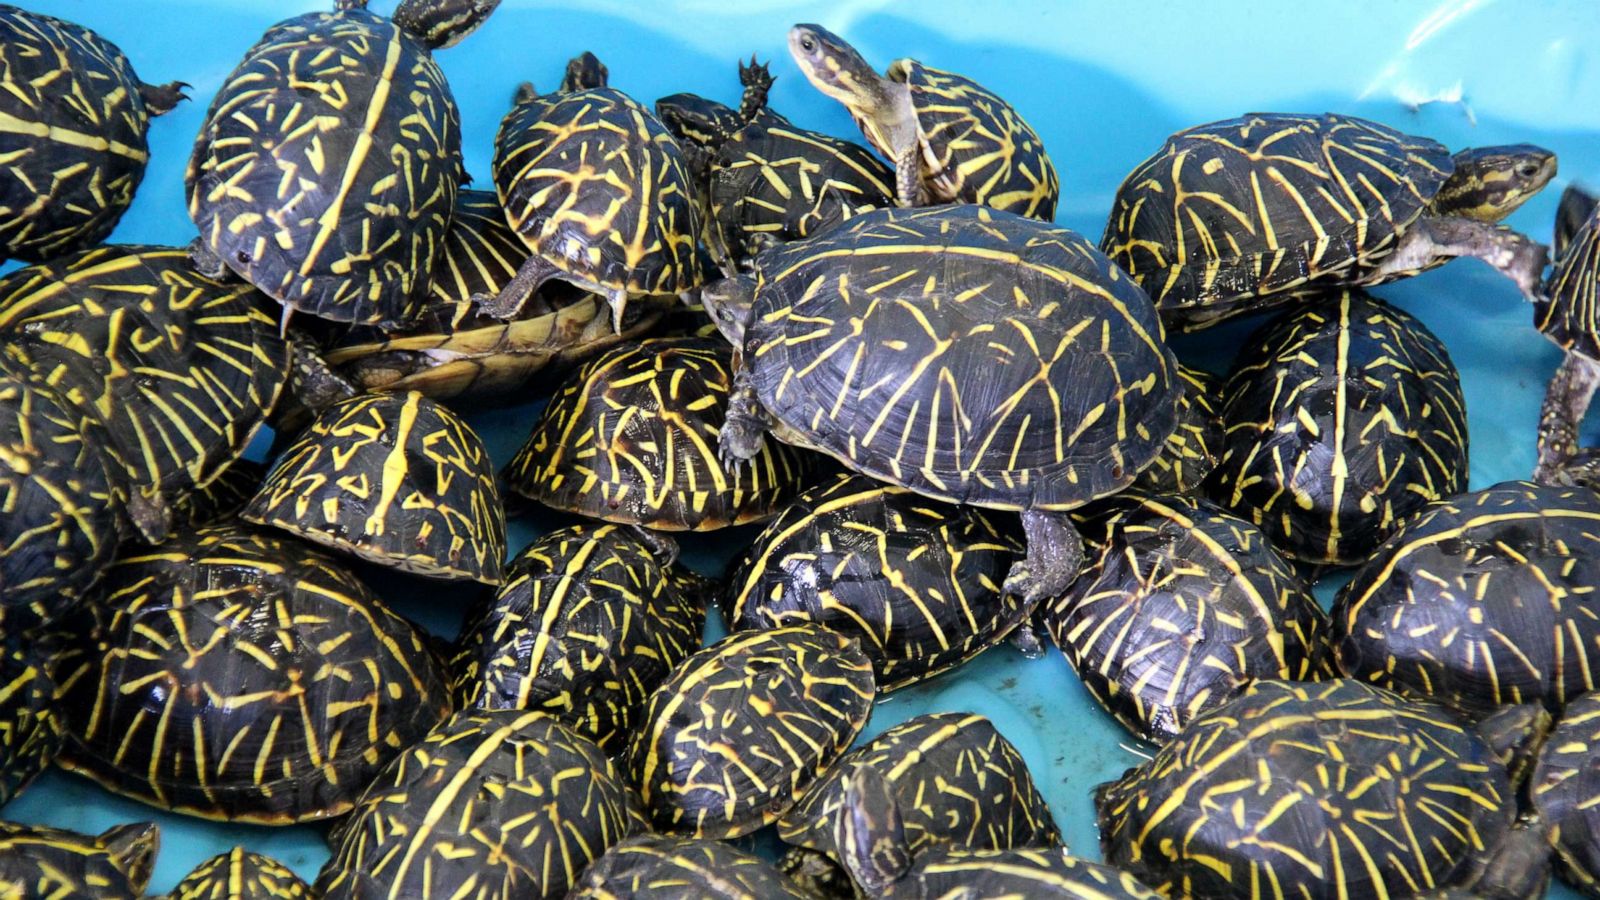 Forest Officials Foil Illegal Trafficking of 1600 Turtles